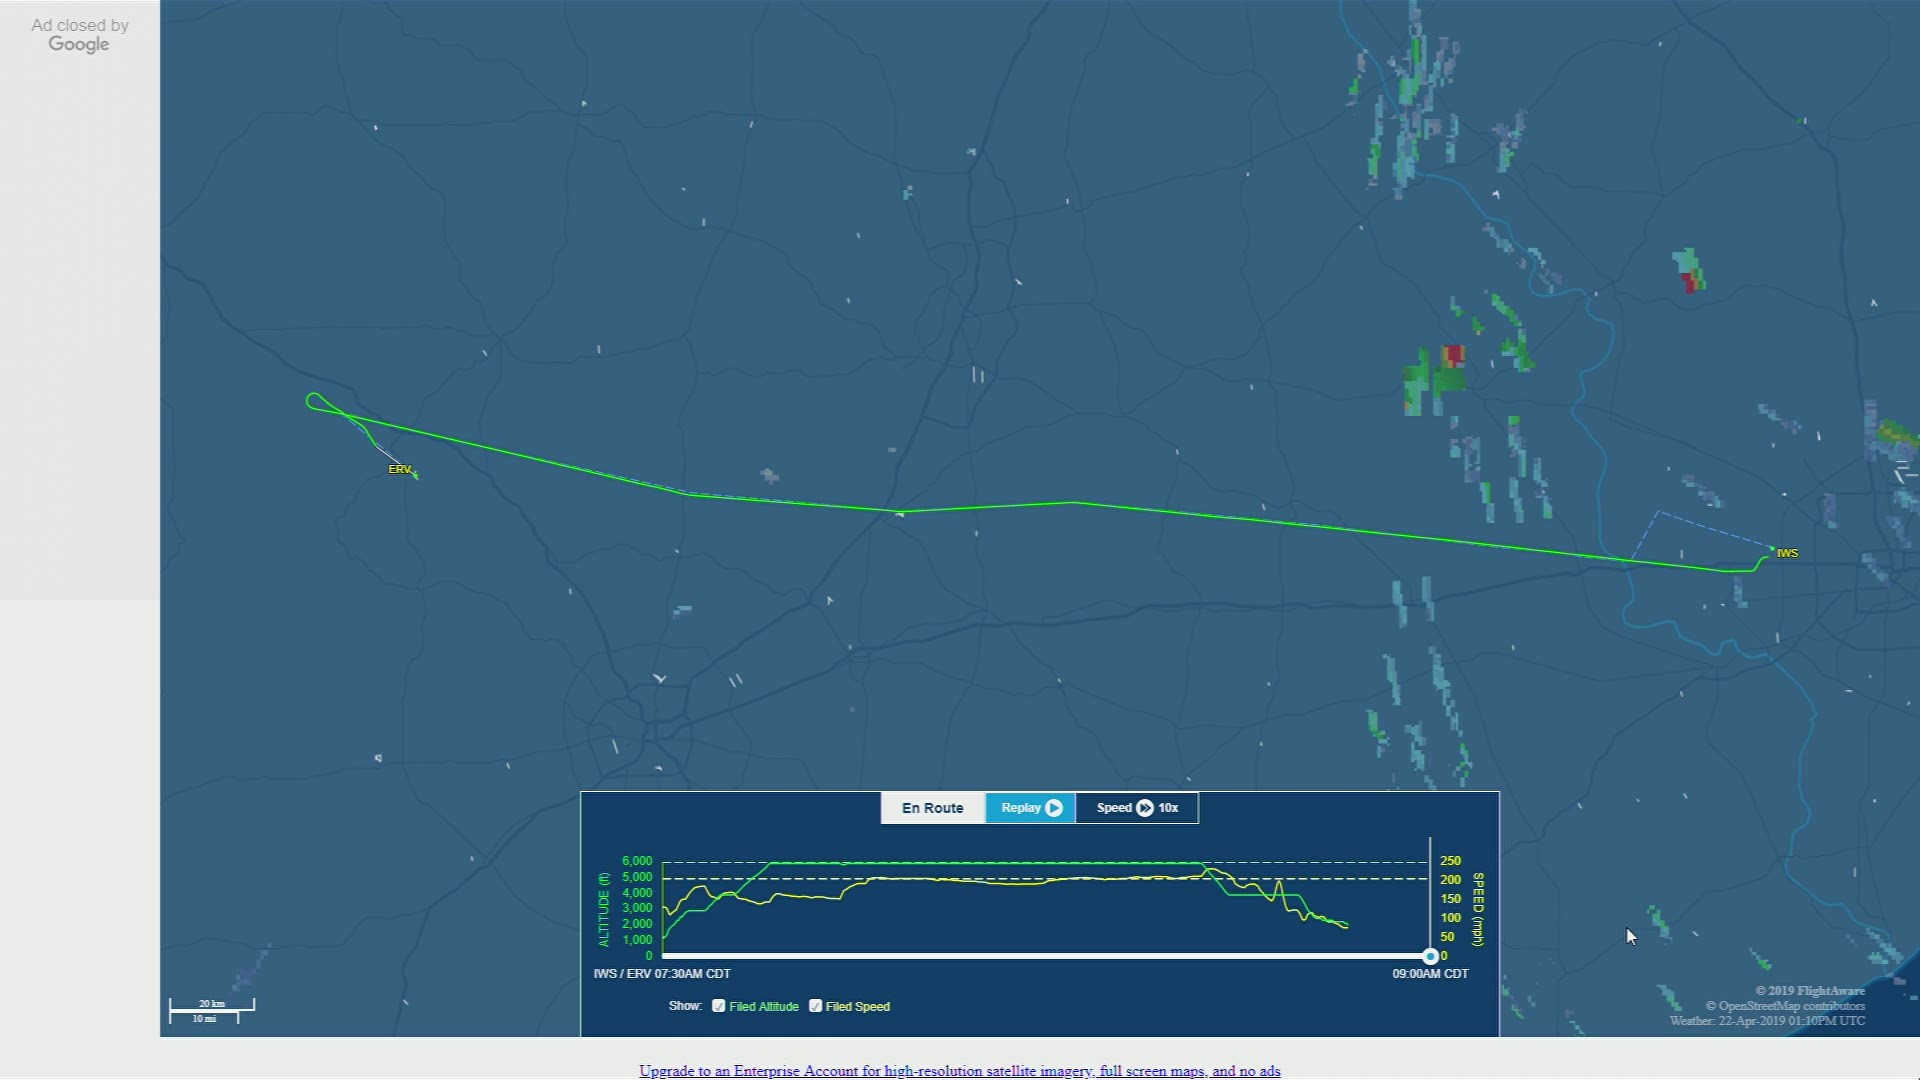 Flightaware's tracker shows the moment when the plane crashed